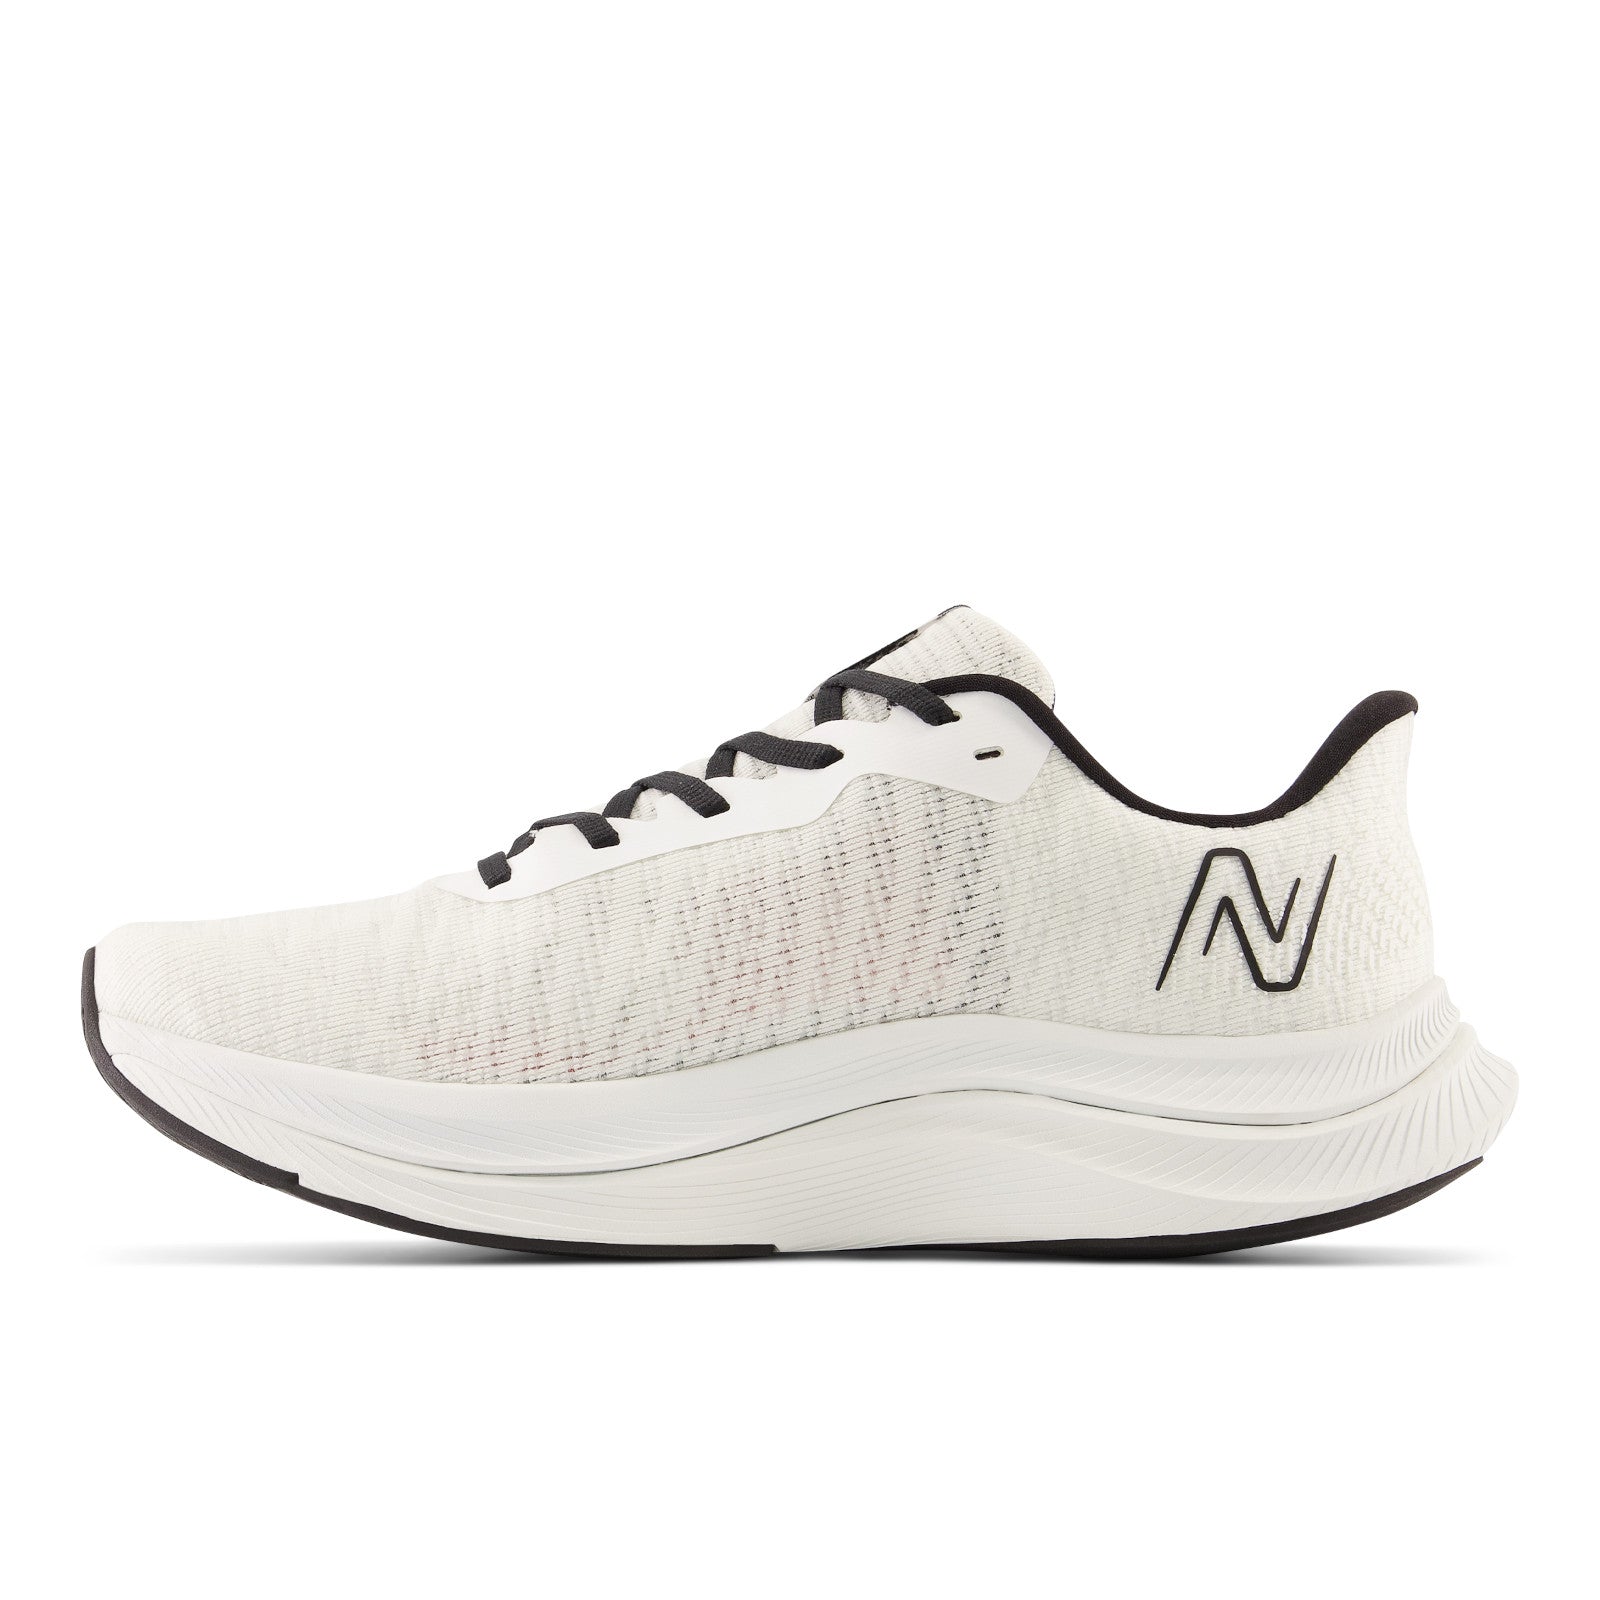 New Balance Men's FuelCell Propel v4 Running Shoes in WHITE